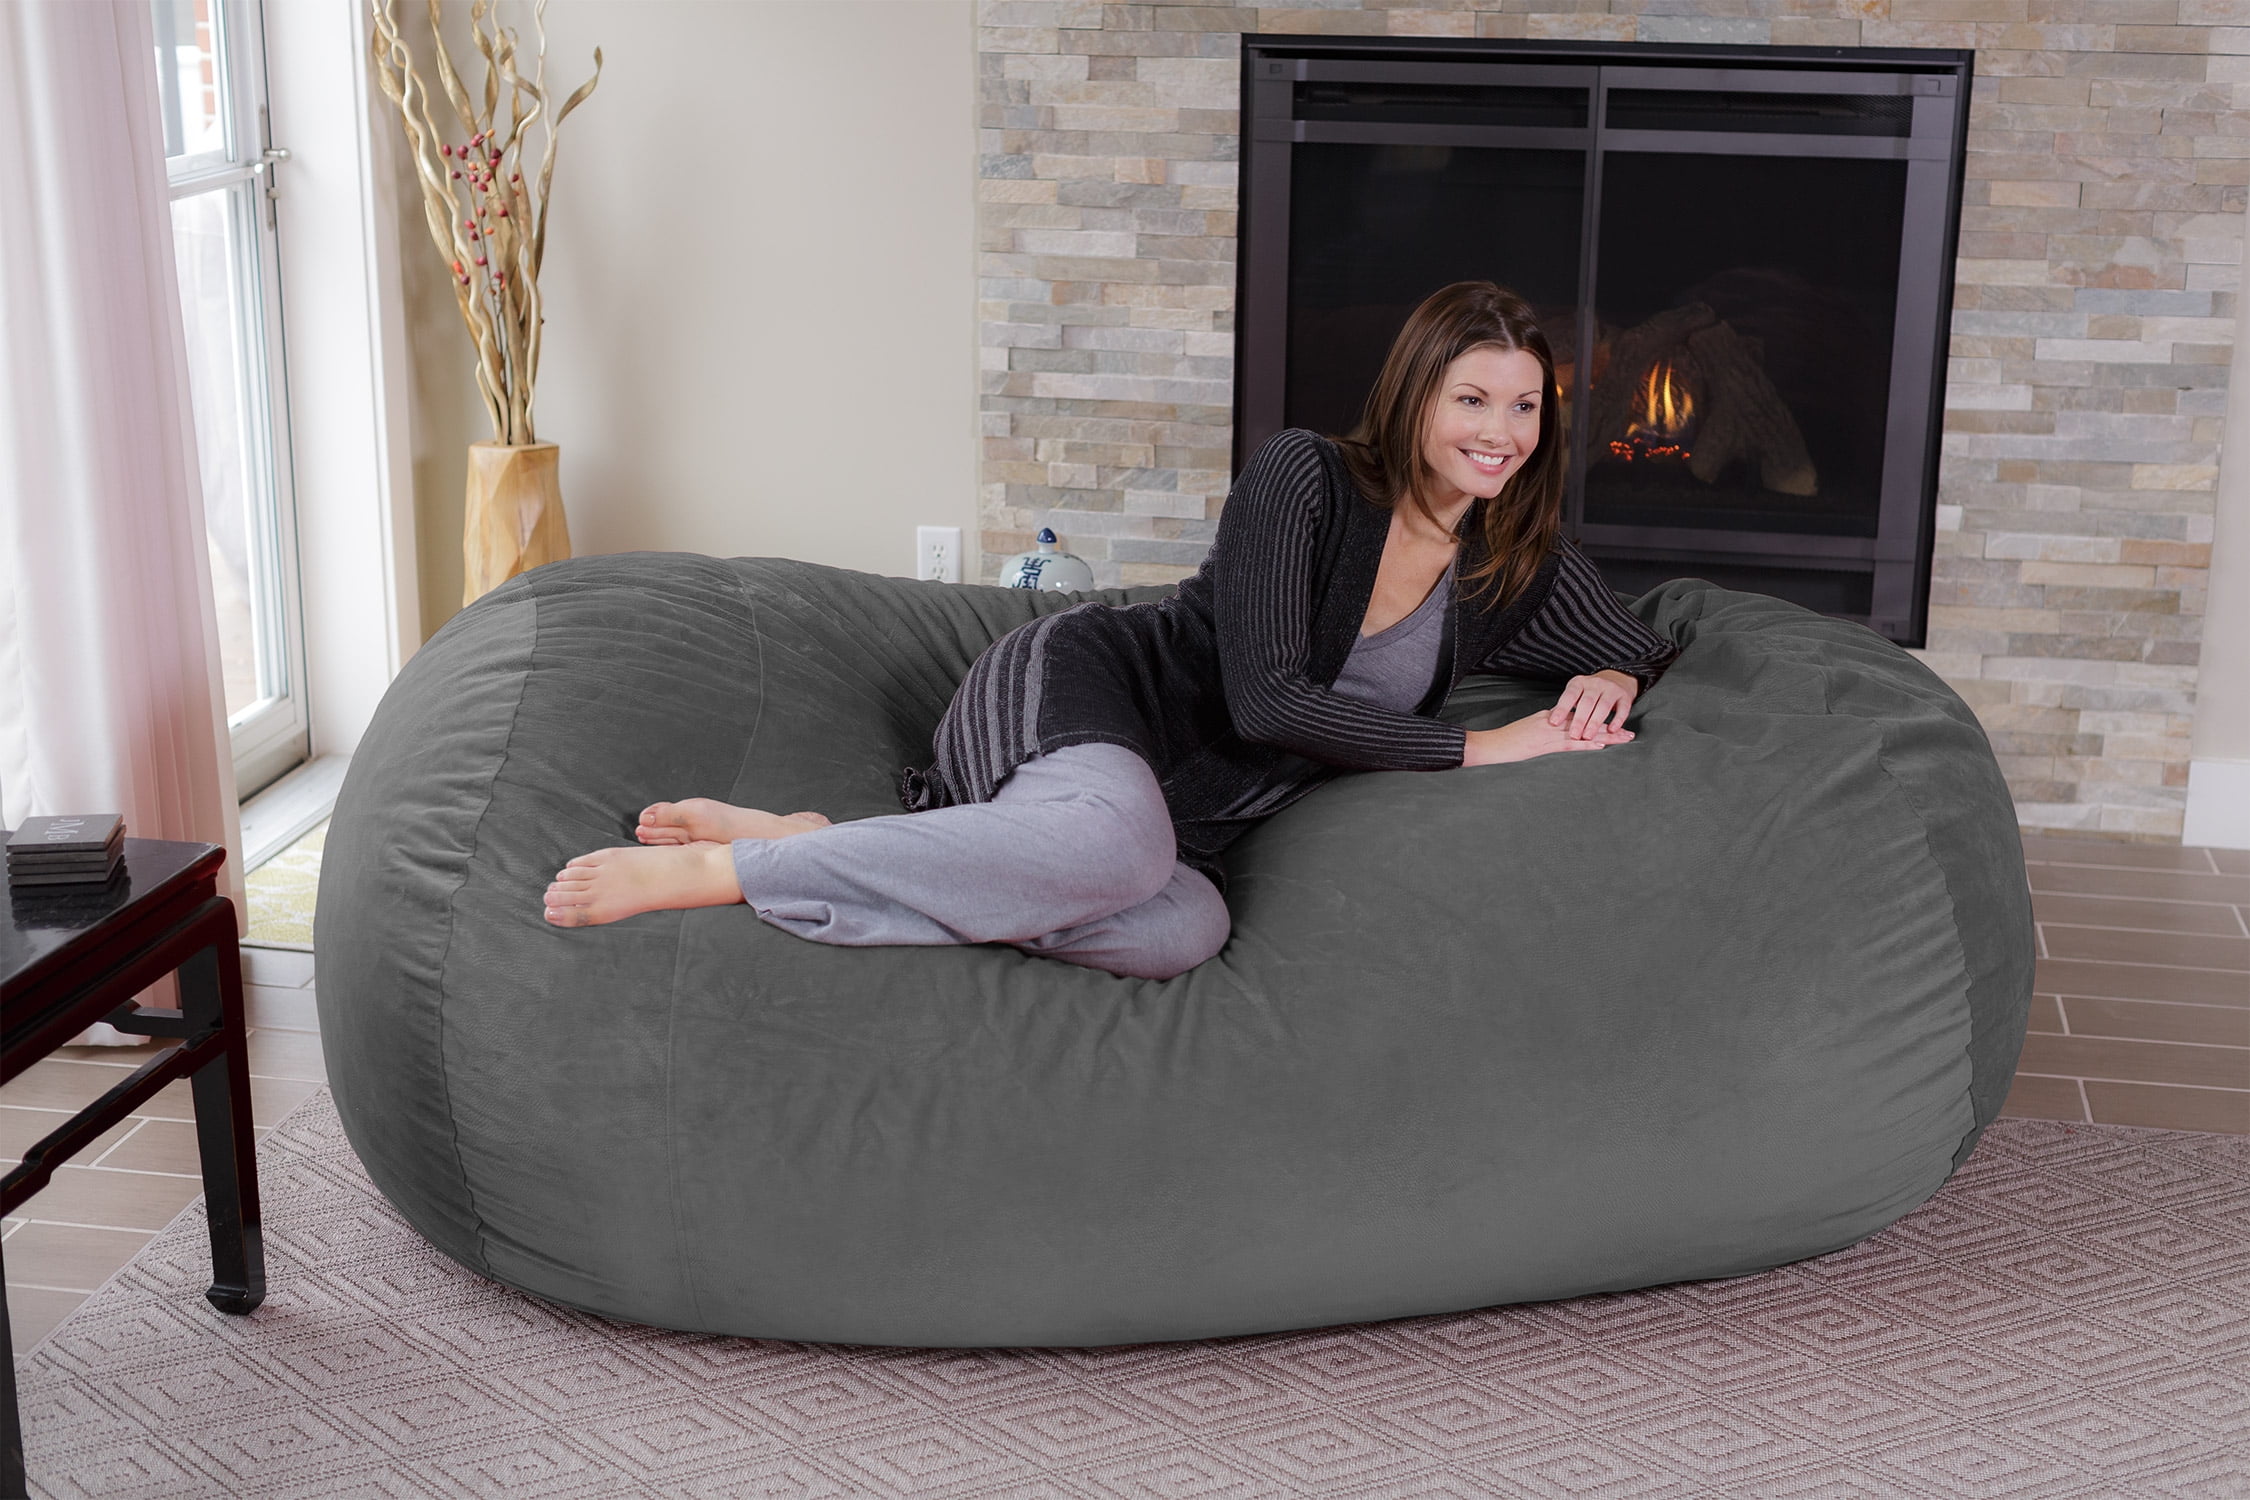 4' Bean Bag Chair With Memory Foam Filling And Washable Cover Black - Relax  Sacks : Target